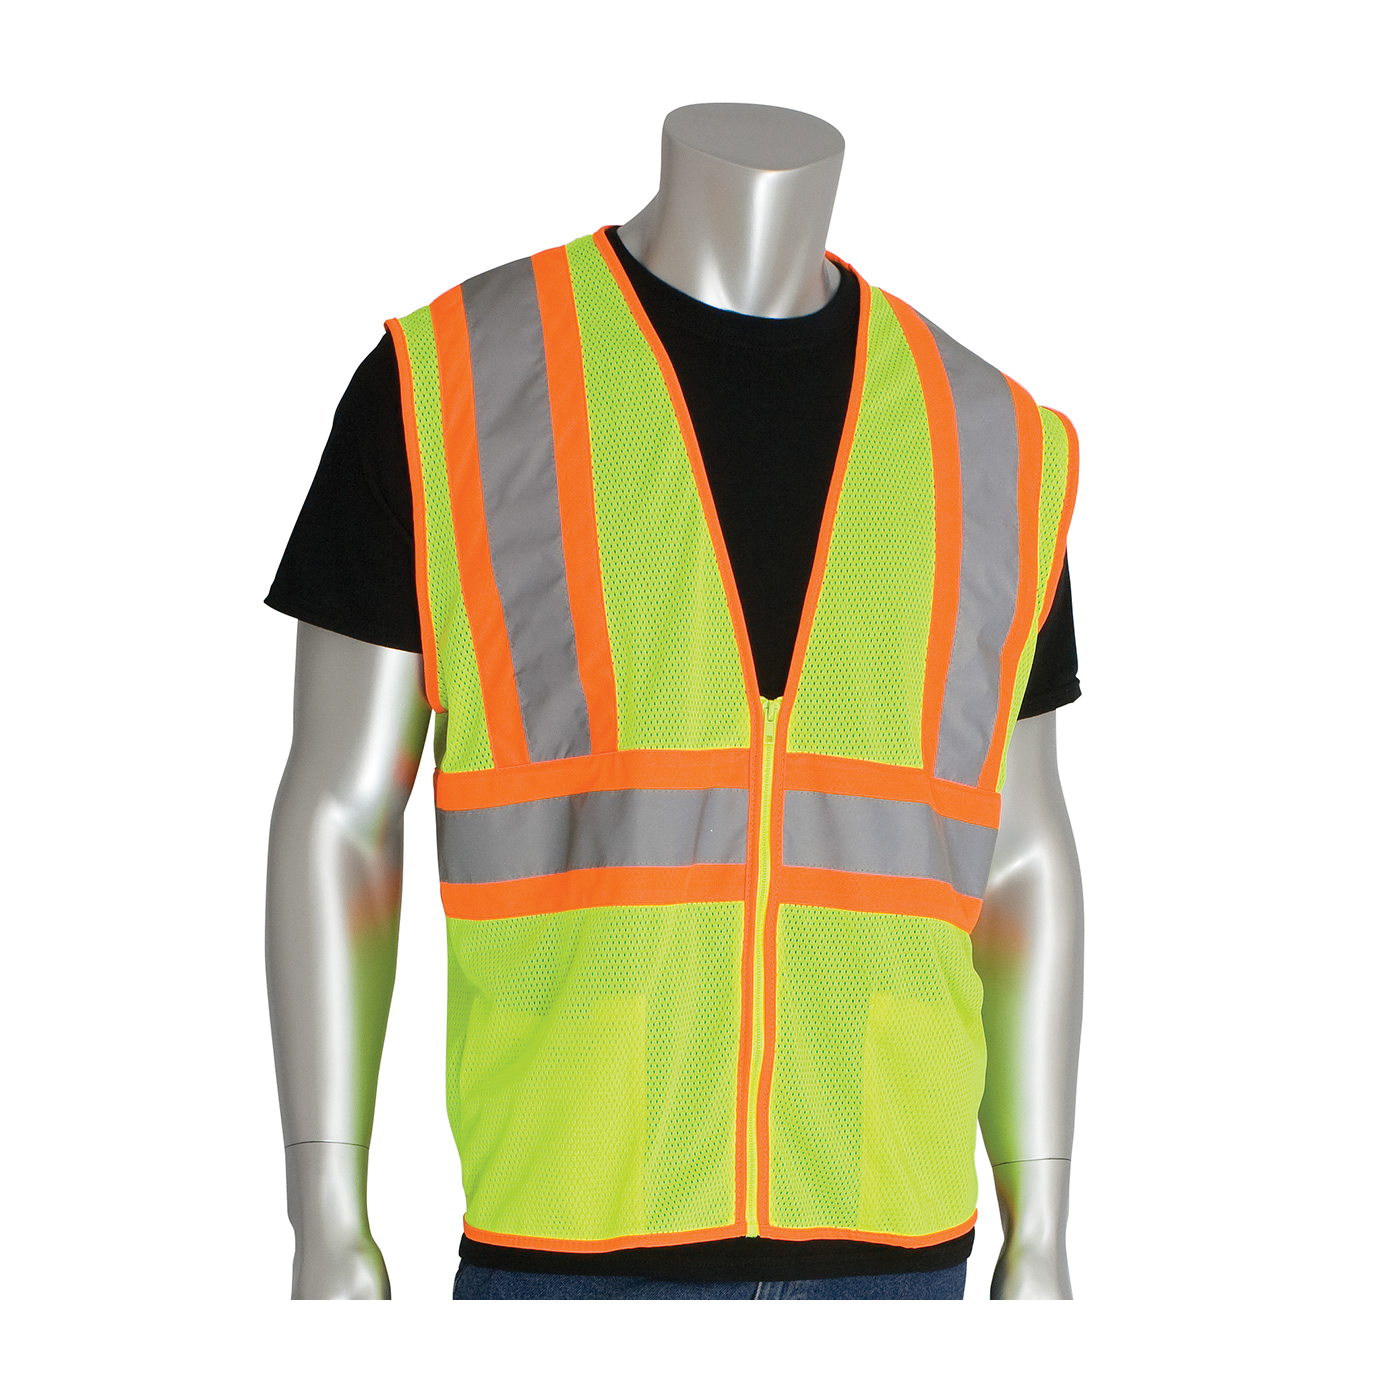 PIP® 302-MVLY-L 2-Tone Safety Vest, L, Hi-Viz Lime Yellow, Polyester Mesh, Zipper Closure, 2 Pockets, ANSI Class: Class 2, Specifications Met: ANSI 107 Type R